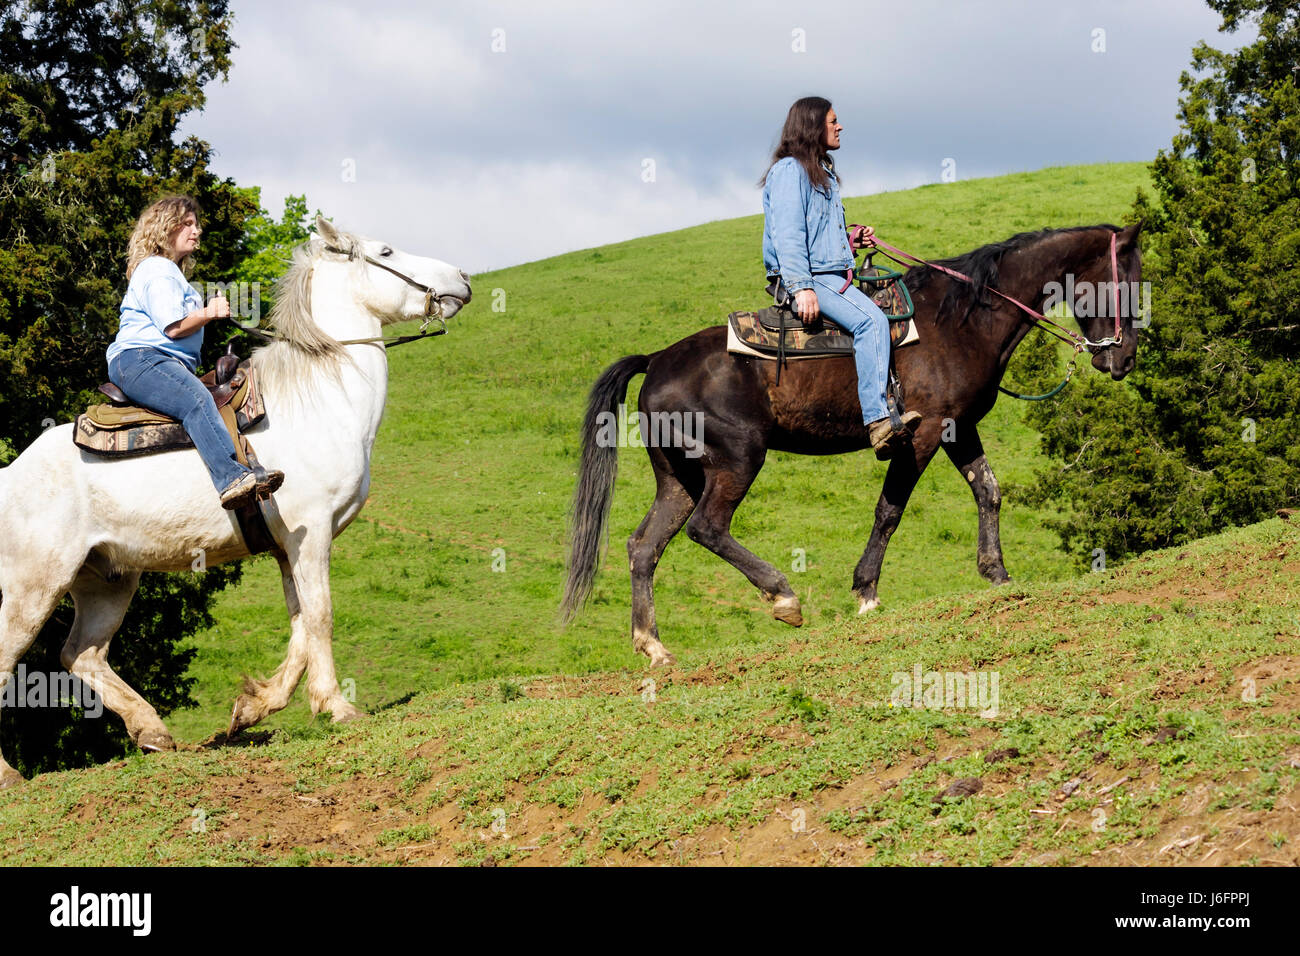 Sevierville Tennessee,Smoky Mountains,Five Oaks Riding Stables,horseback riding,adult adults woman women female lady,Native American,man,trail guide,h Stock Photo